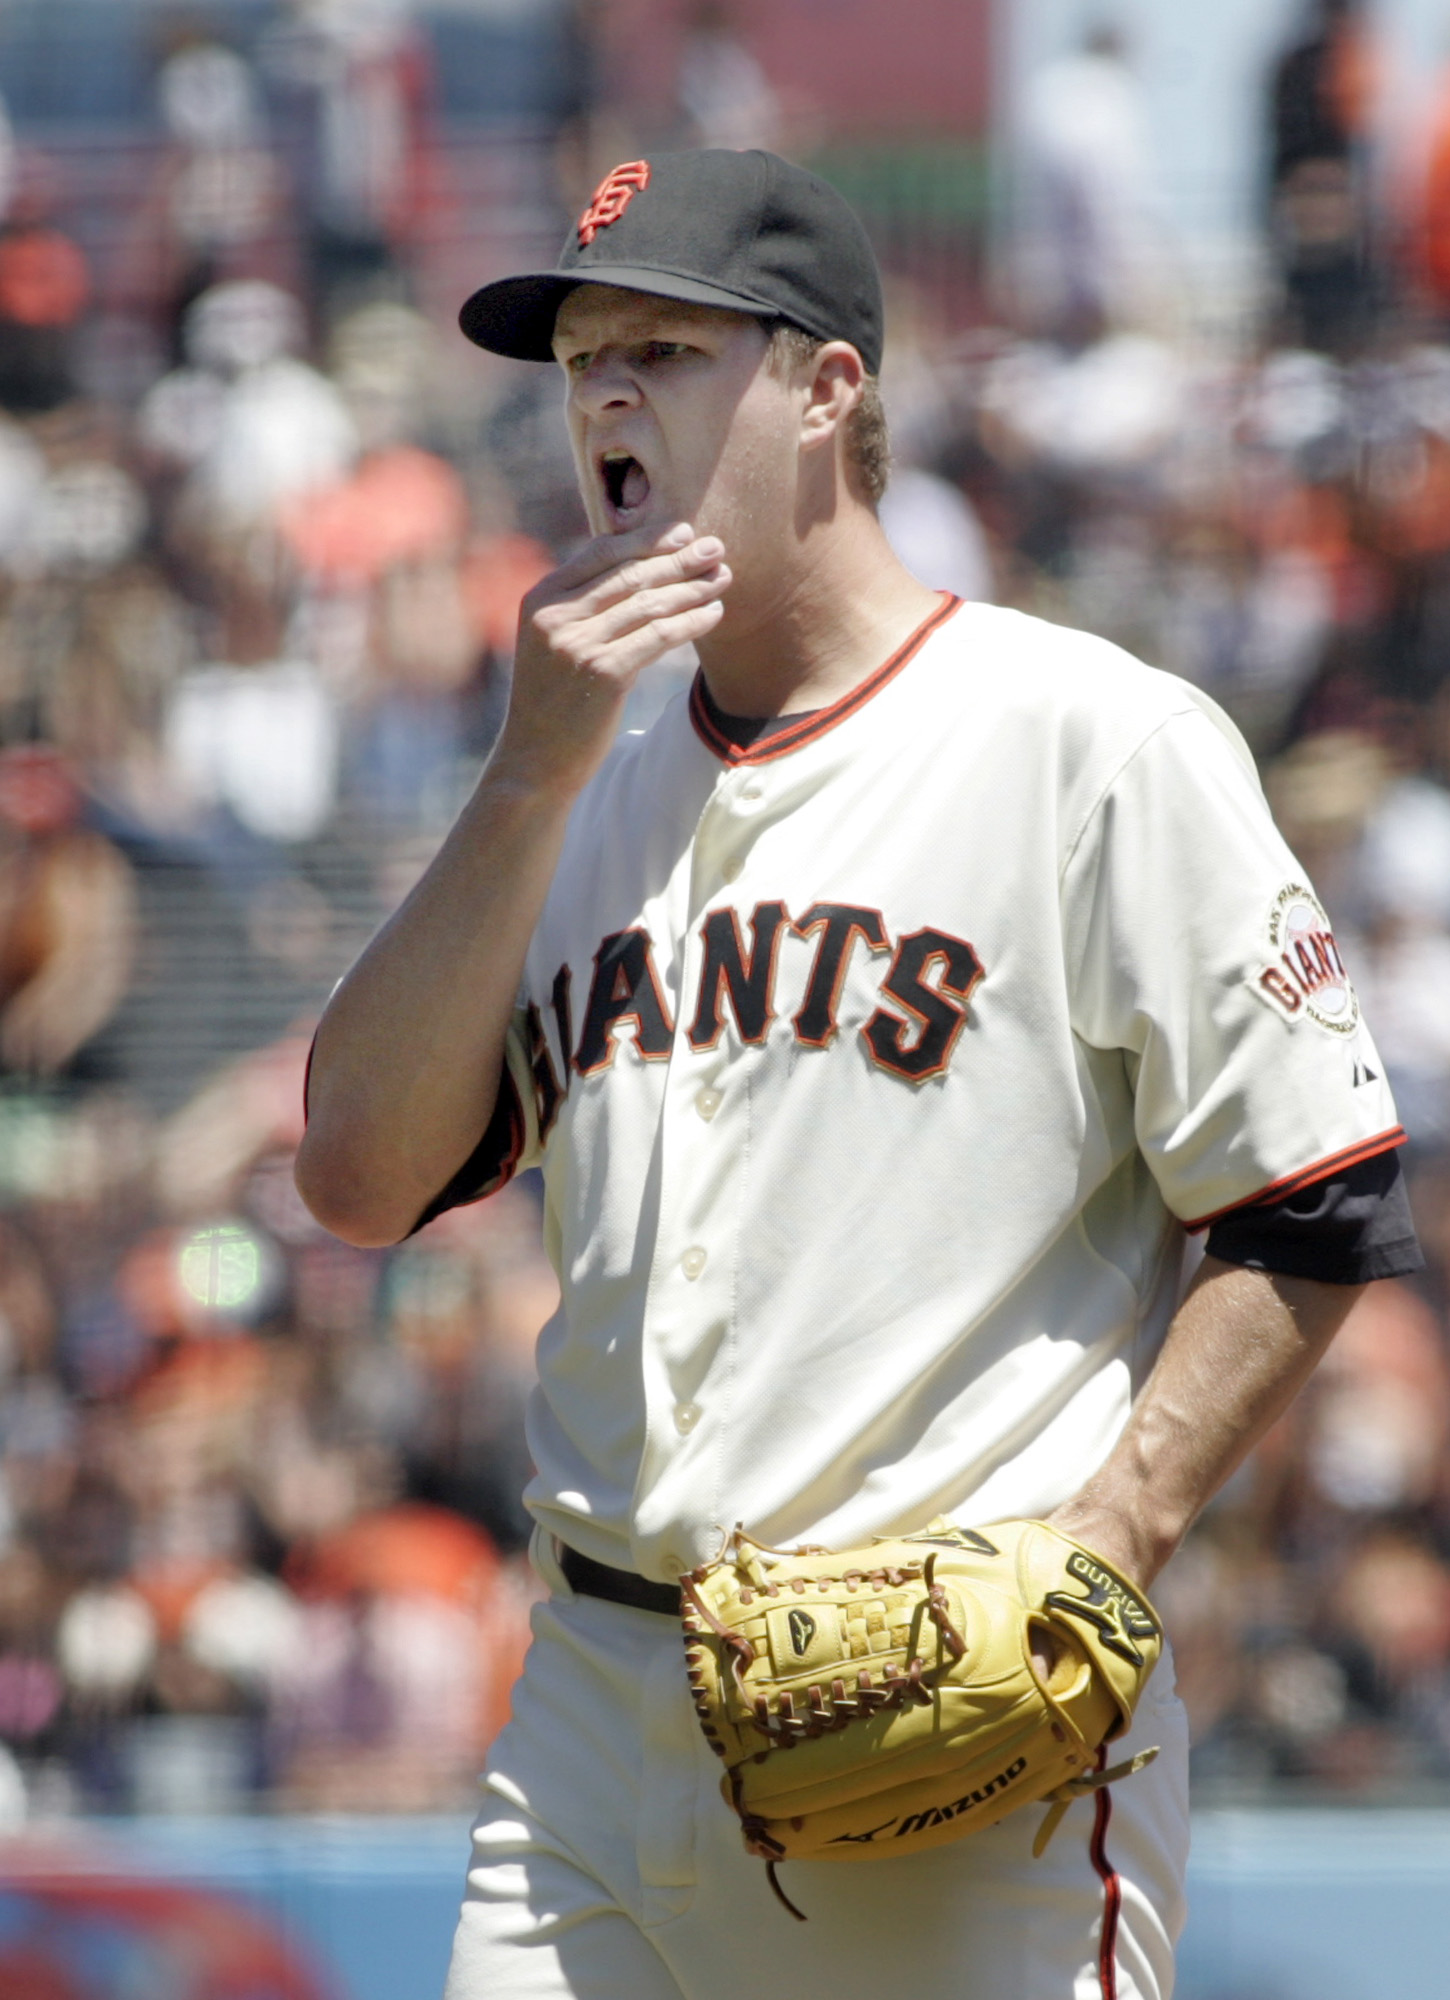 Matt Cain of the San Francisco Giants was shell-shocked, not completing the first inning against the NewYork Mets Wednesday, July 10, 2013, in San Francisco, Calif. It was the first time in Cain’s major league career that he was knocked out of a game in t